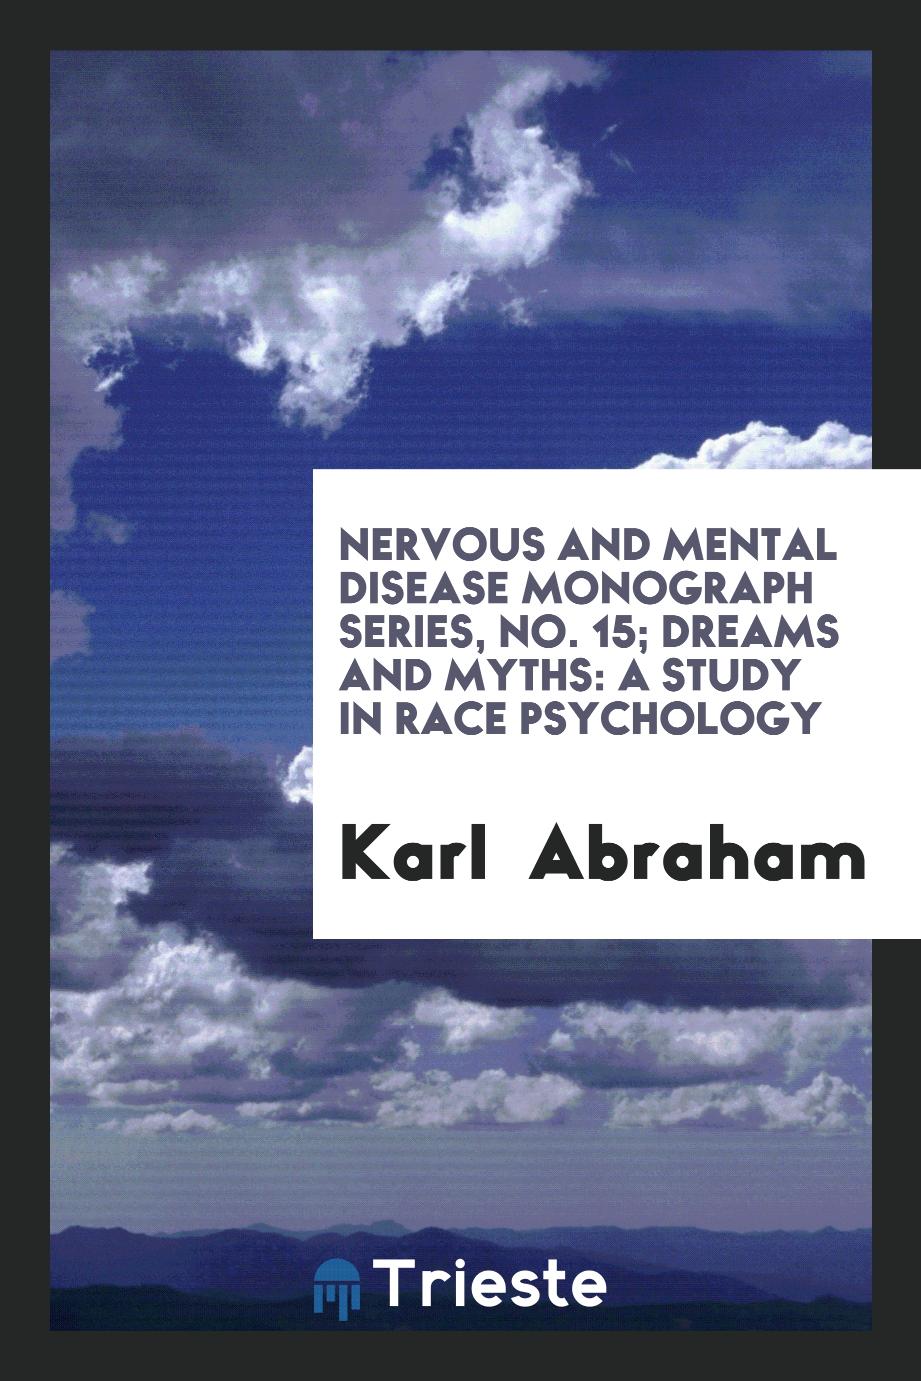 Nervous and Mental Disease Monograph Series, No. 15; Dreams and Myths: A Study in Race Psychology